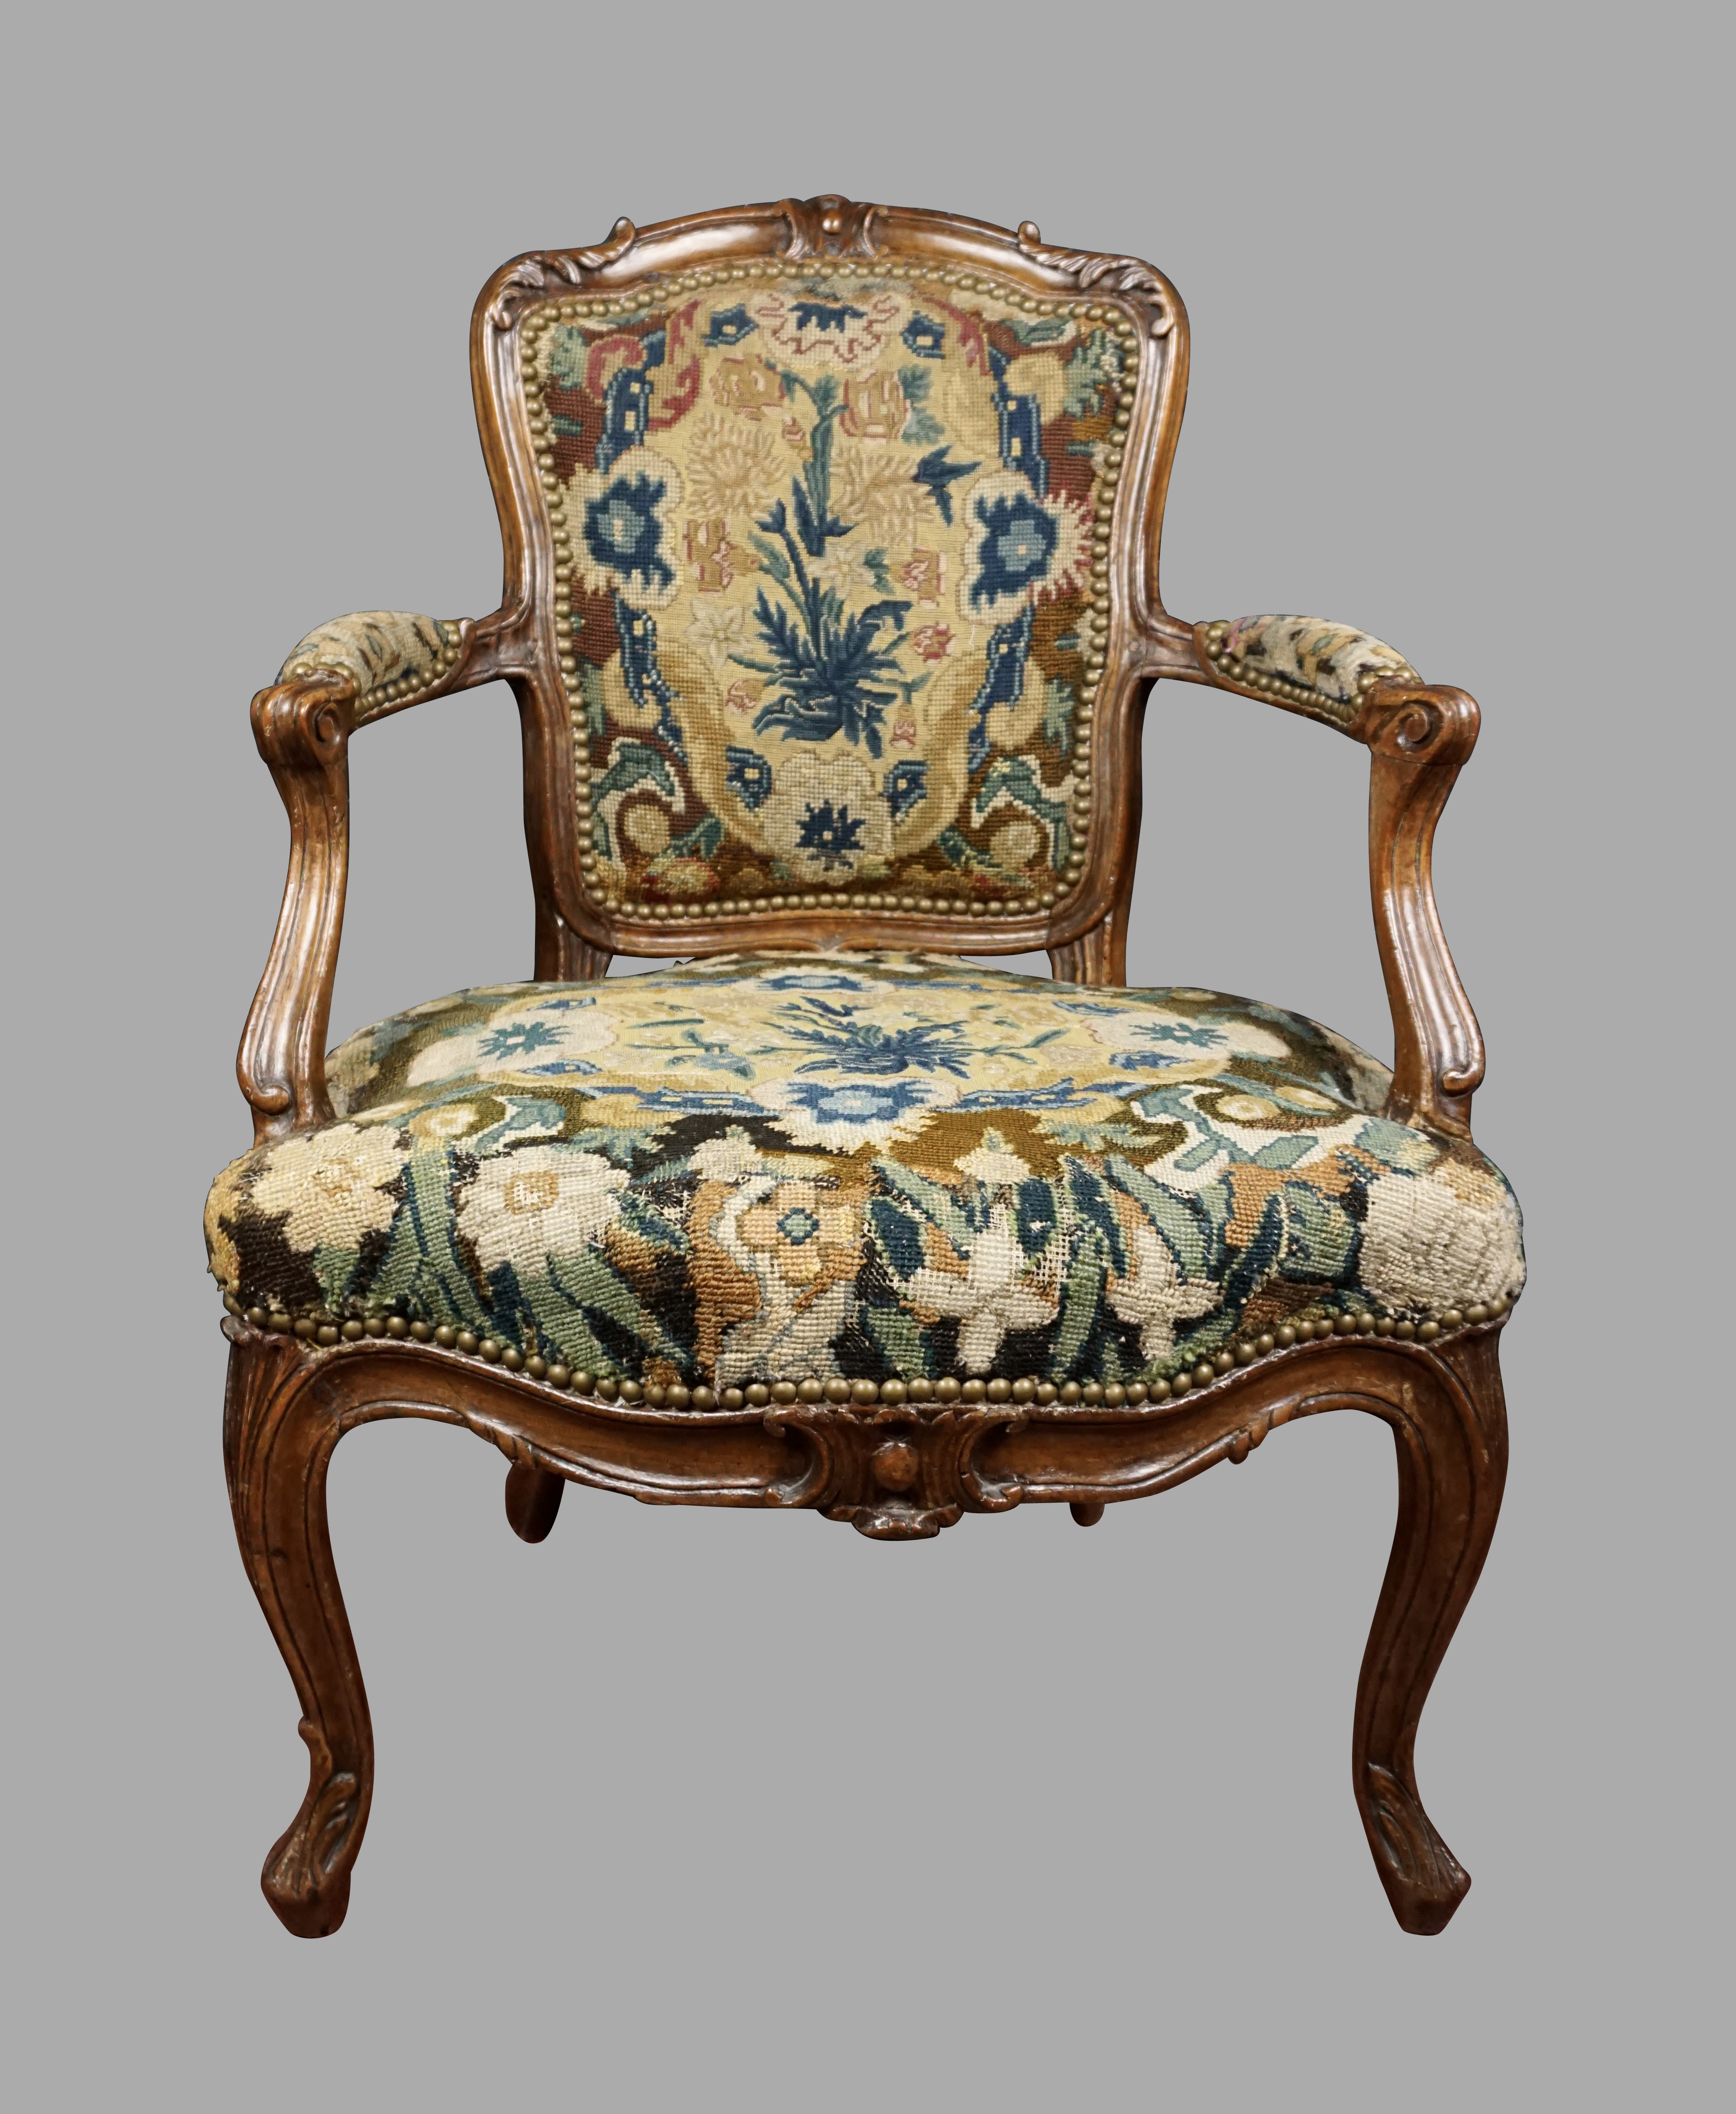 Louis XV, Louis XV Style Needlepoint Parlor Chair